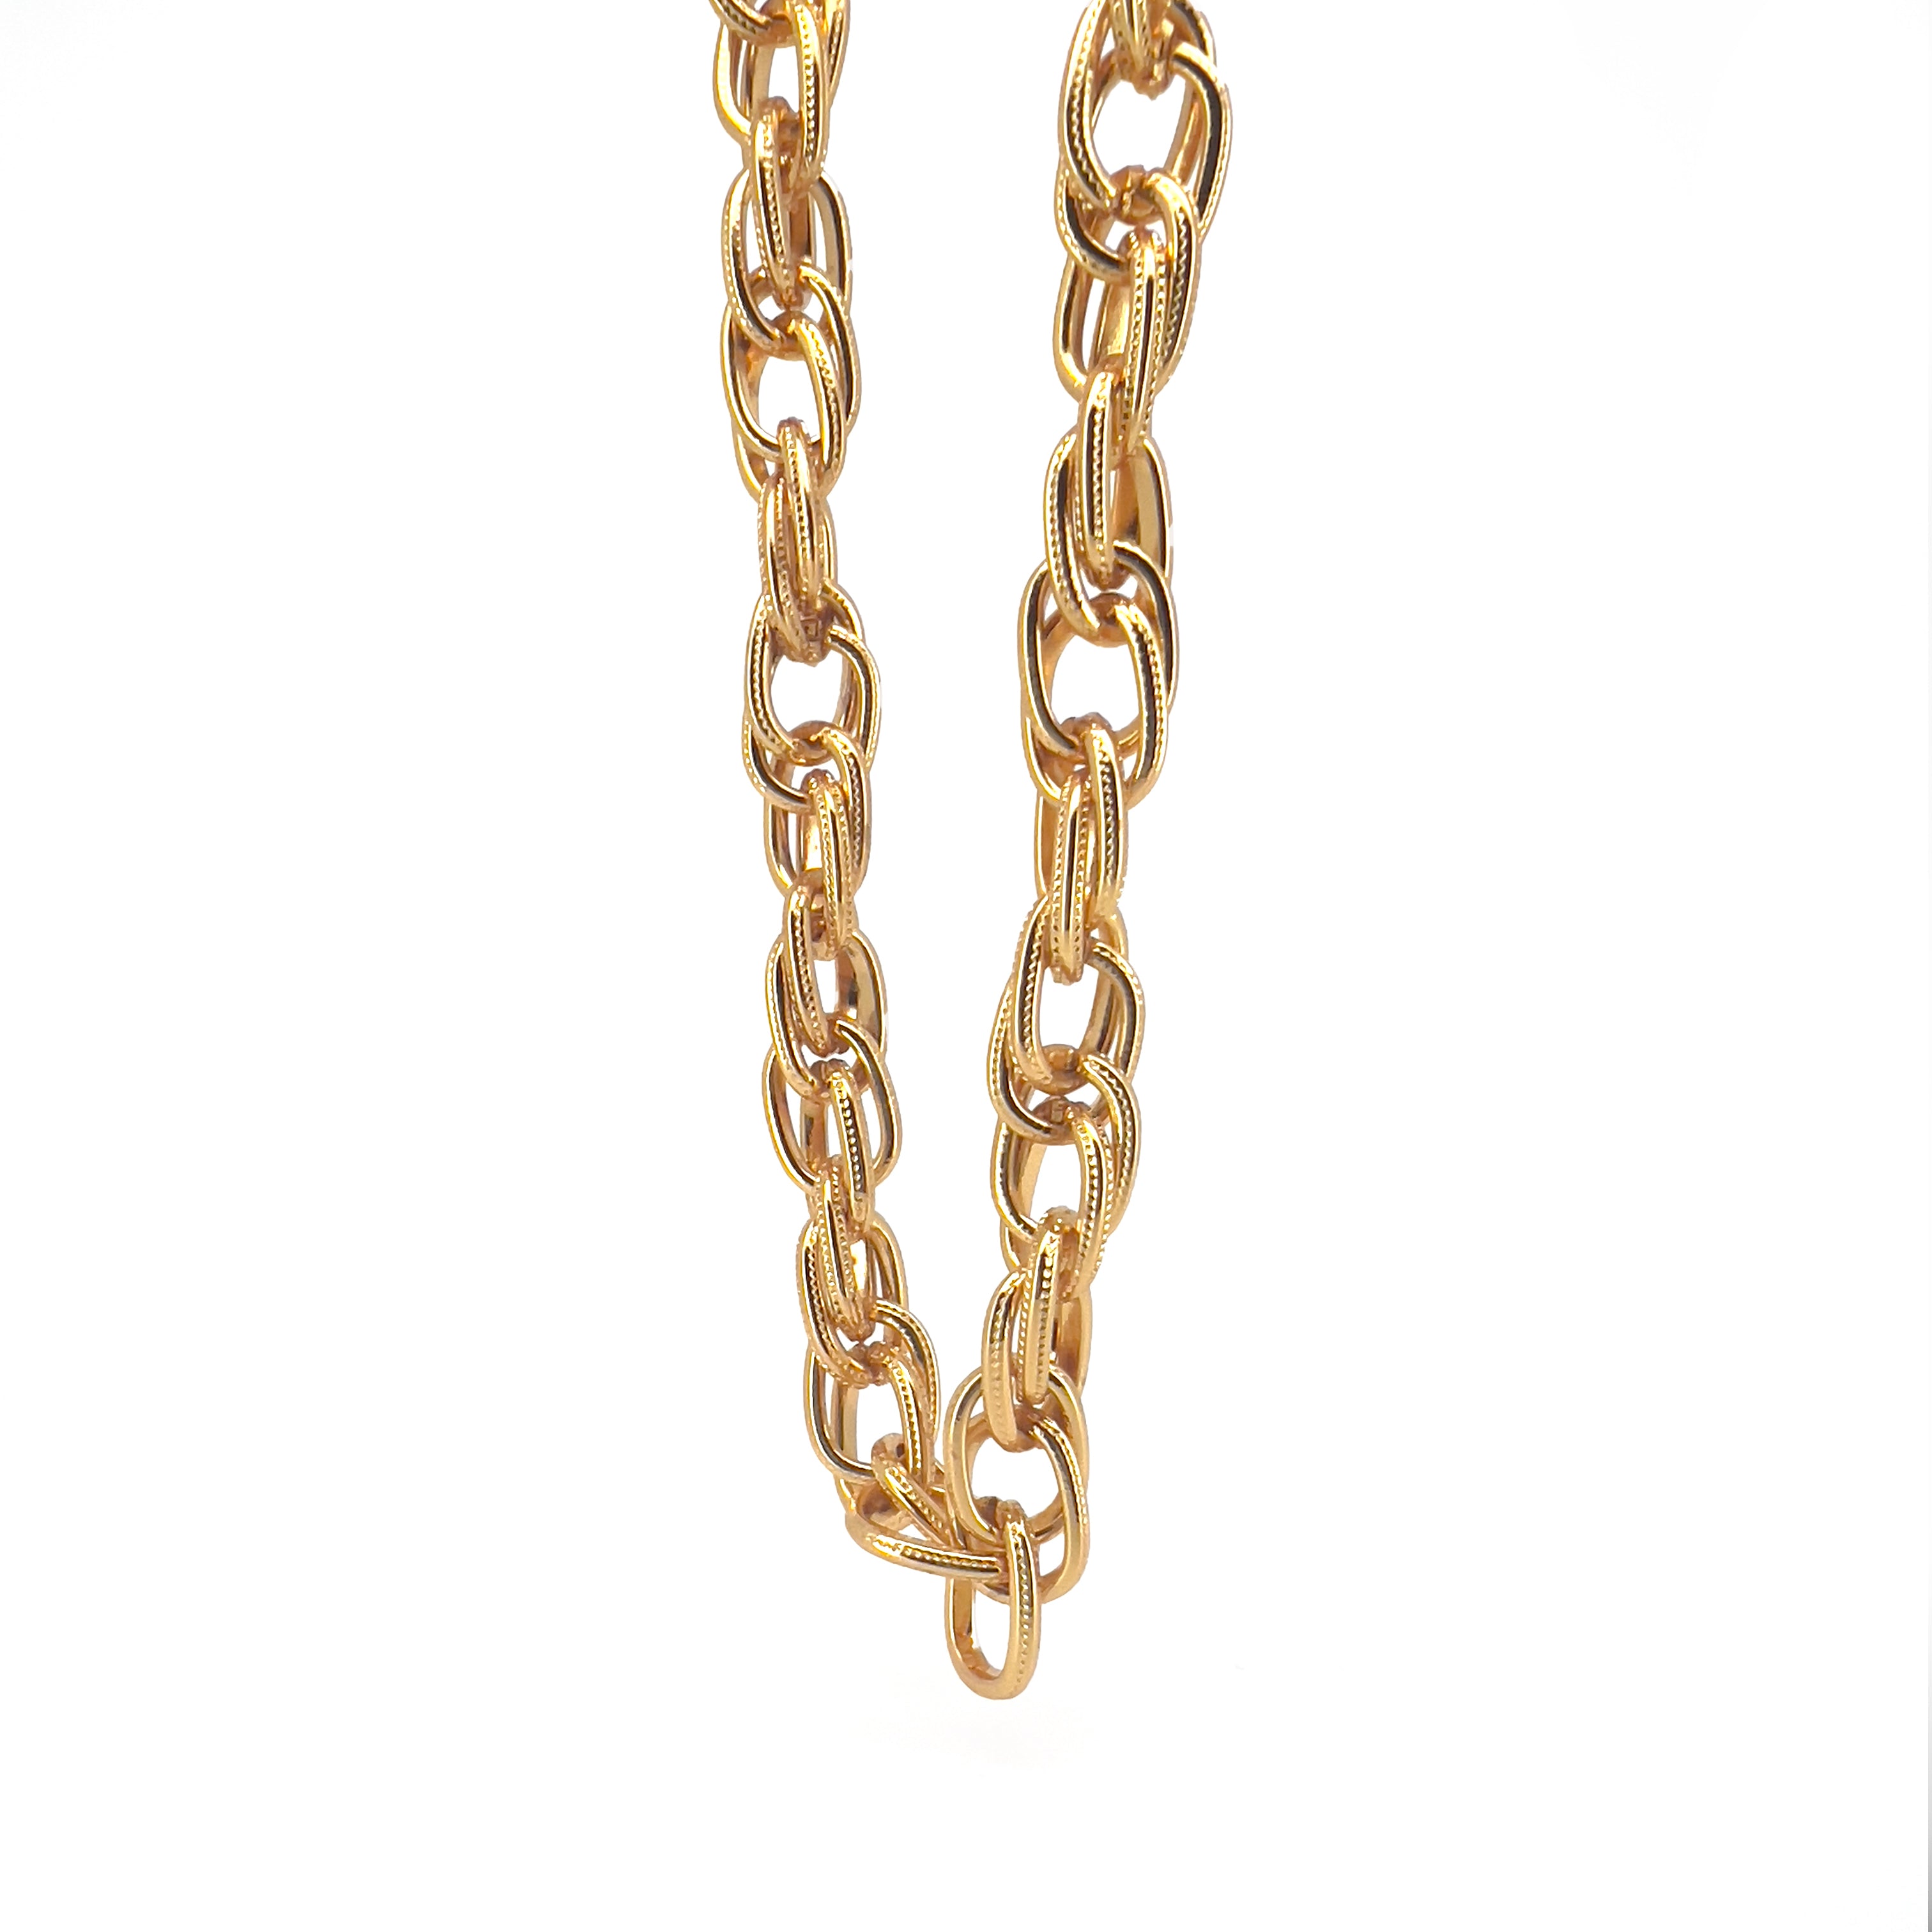 Jaylen Loose Rope Chain Necklace